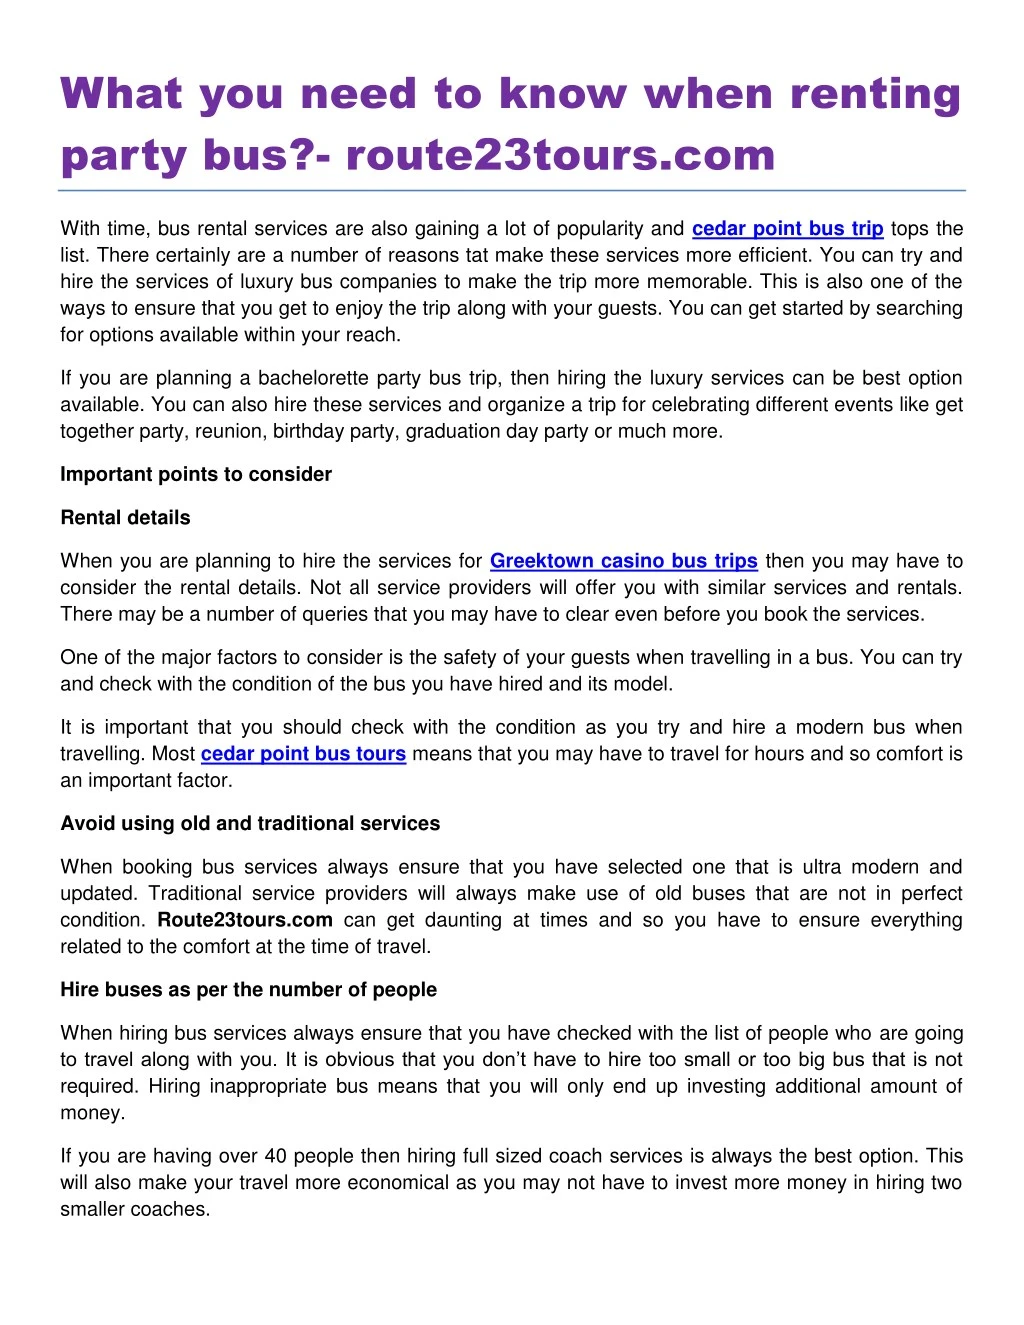 what you need to know when renting party